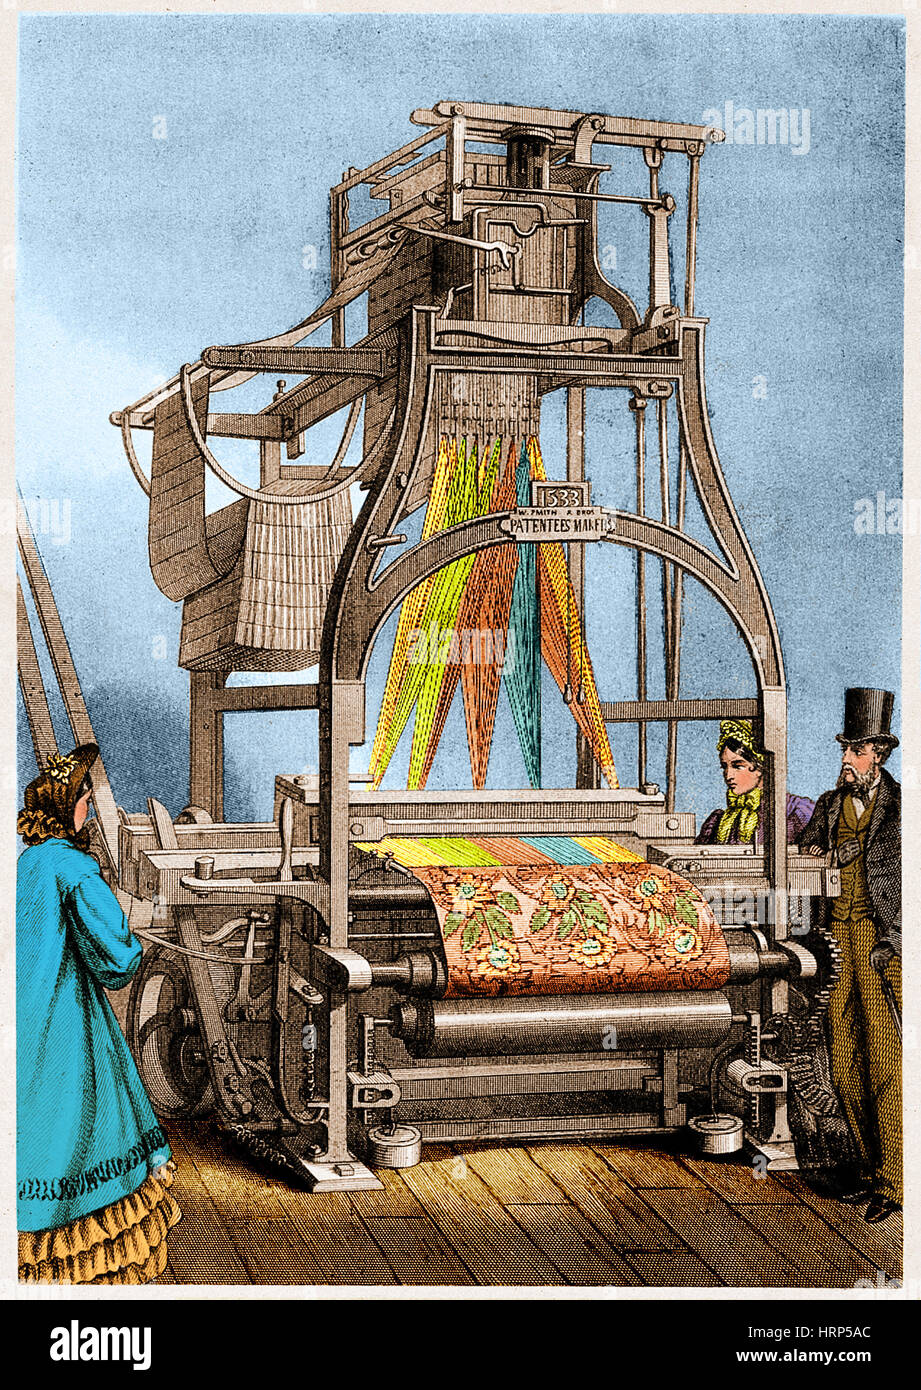 Jacquard Loom for Weaving Textiles Stock Photo